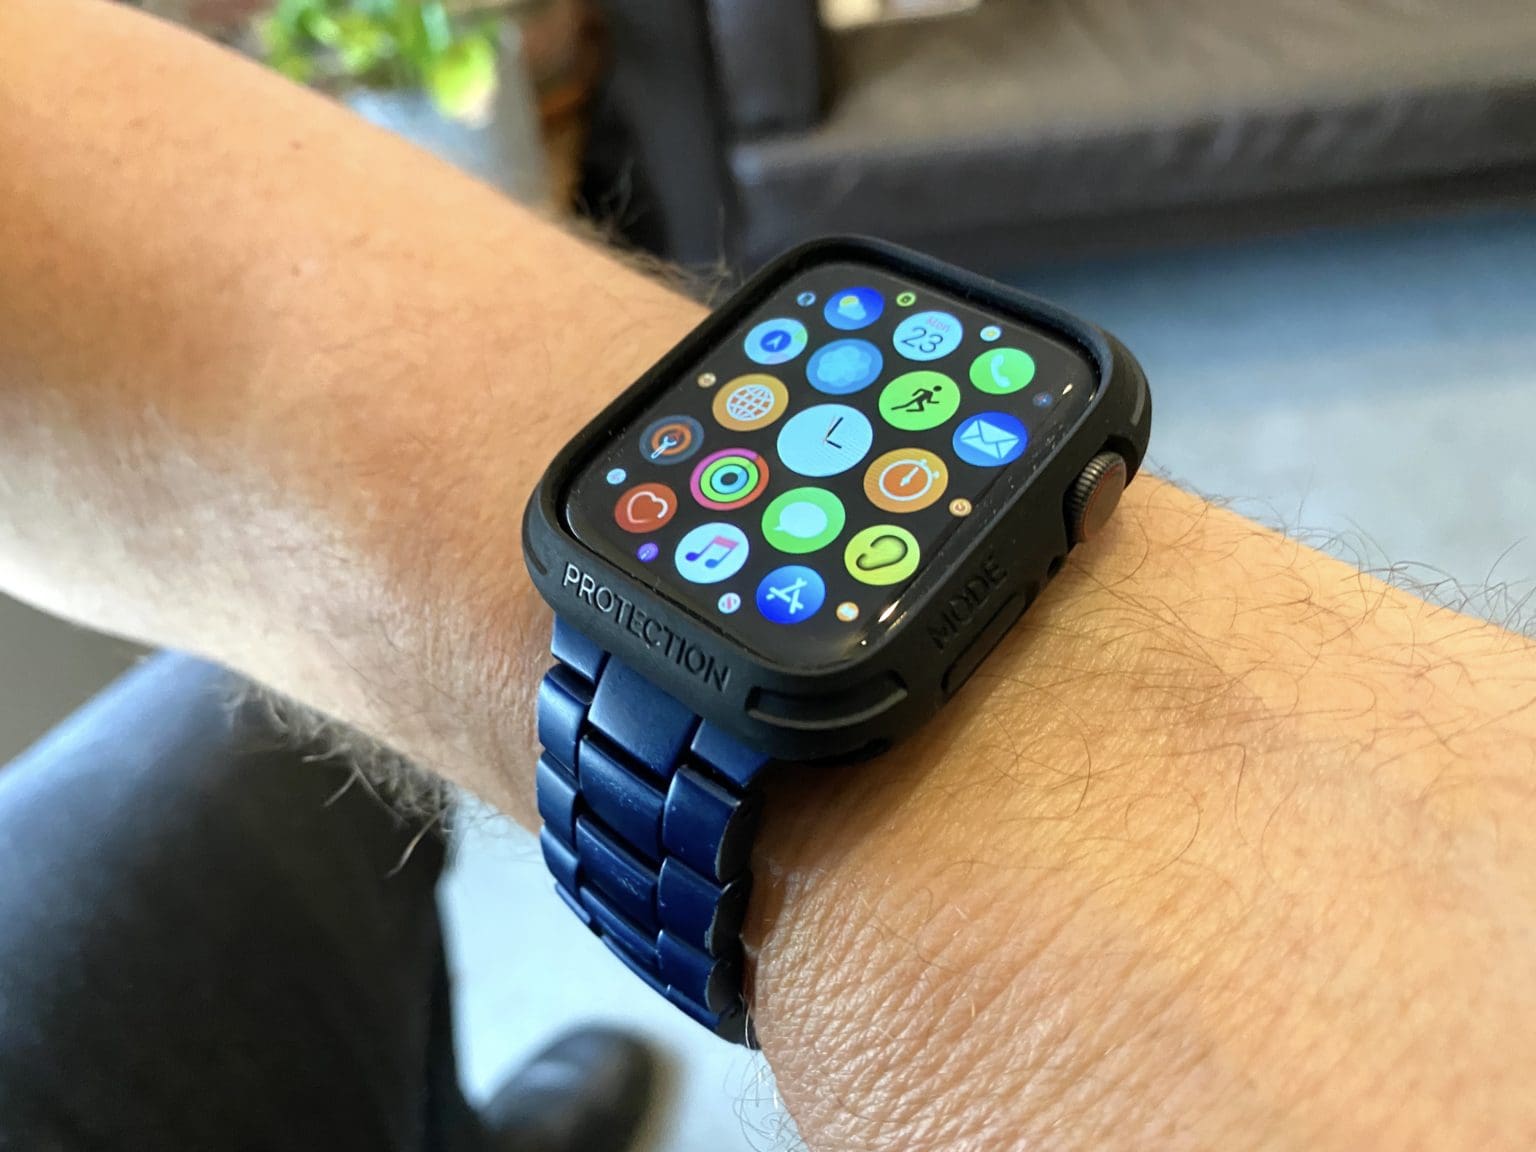 The Elkson Apple Watch bumper case solved a problem that drove me crazy, and it looks good too!